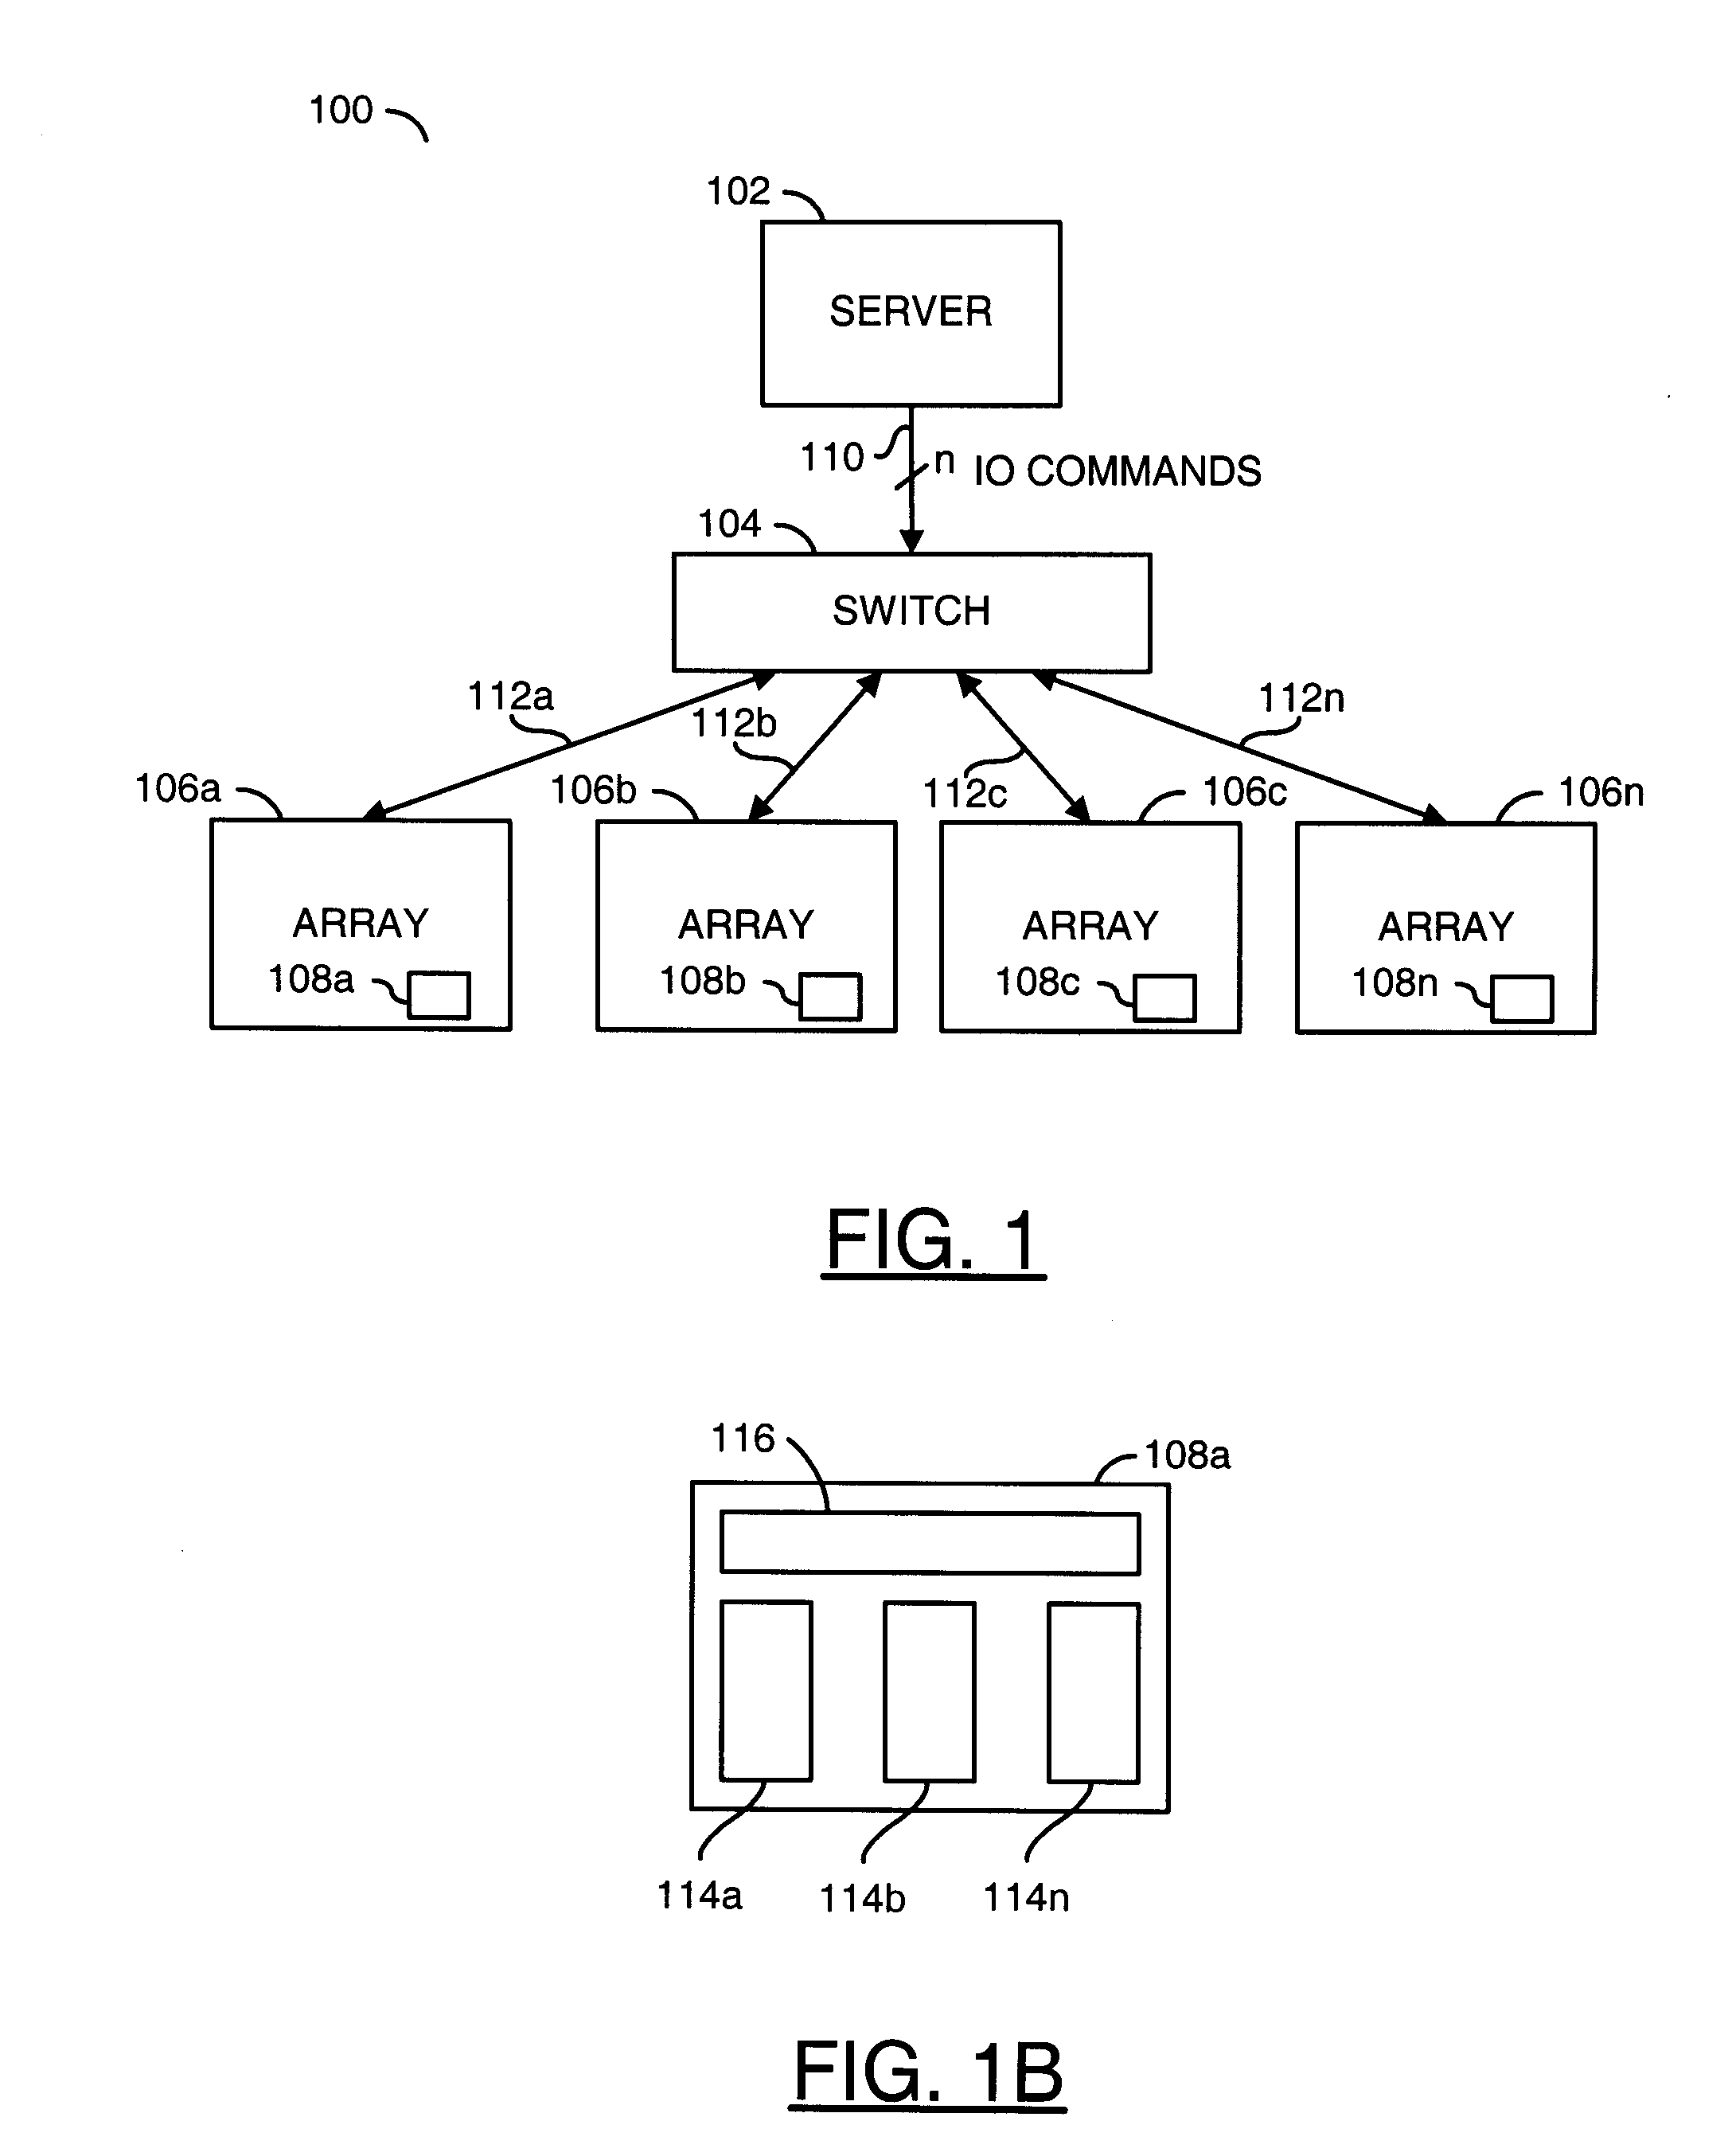 System for handling input/output requests between storage arrays with different performance capabilities